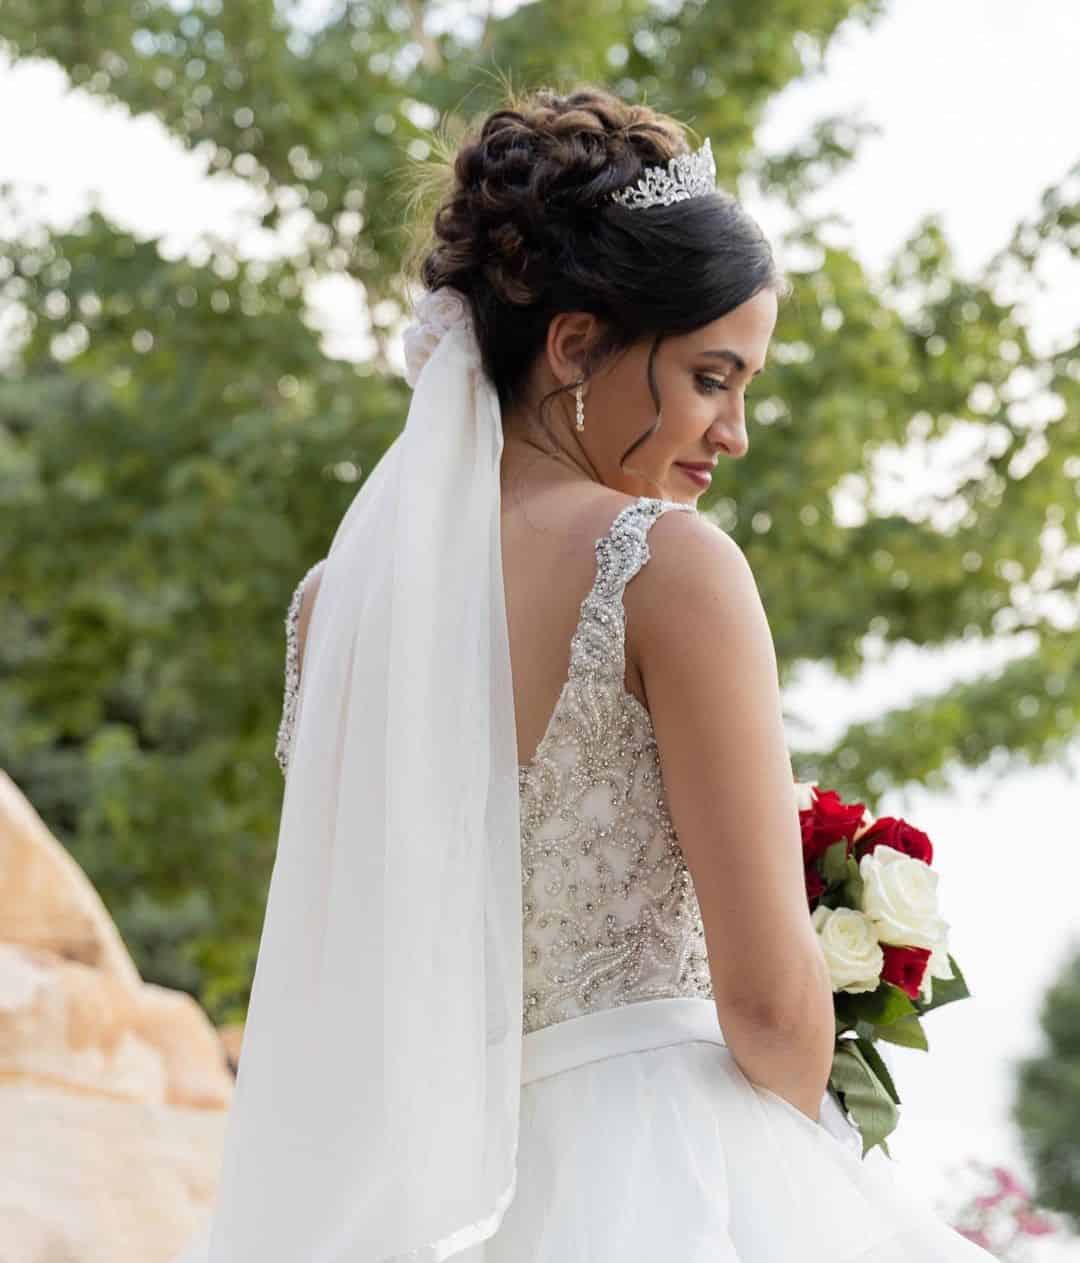 Bun Wedding Hairstyle With Veil And A Crown